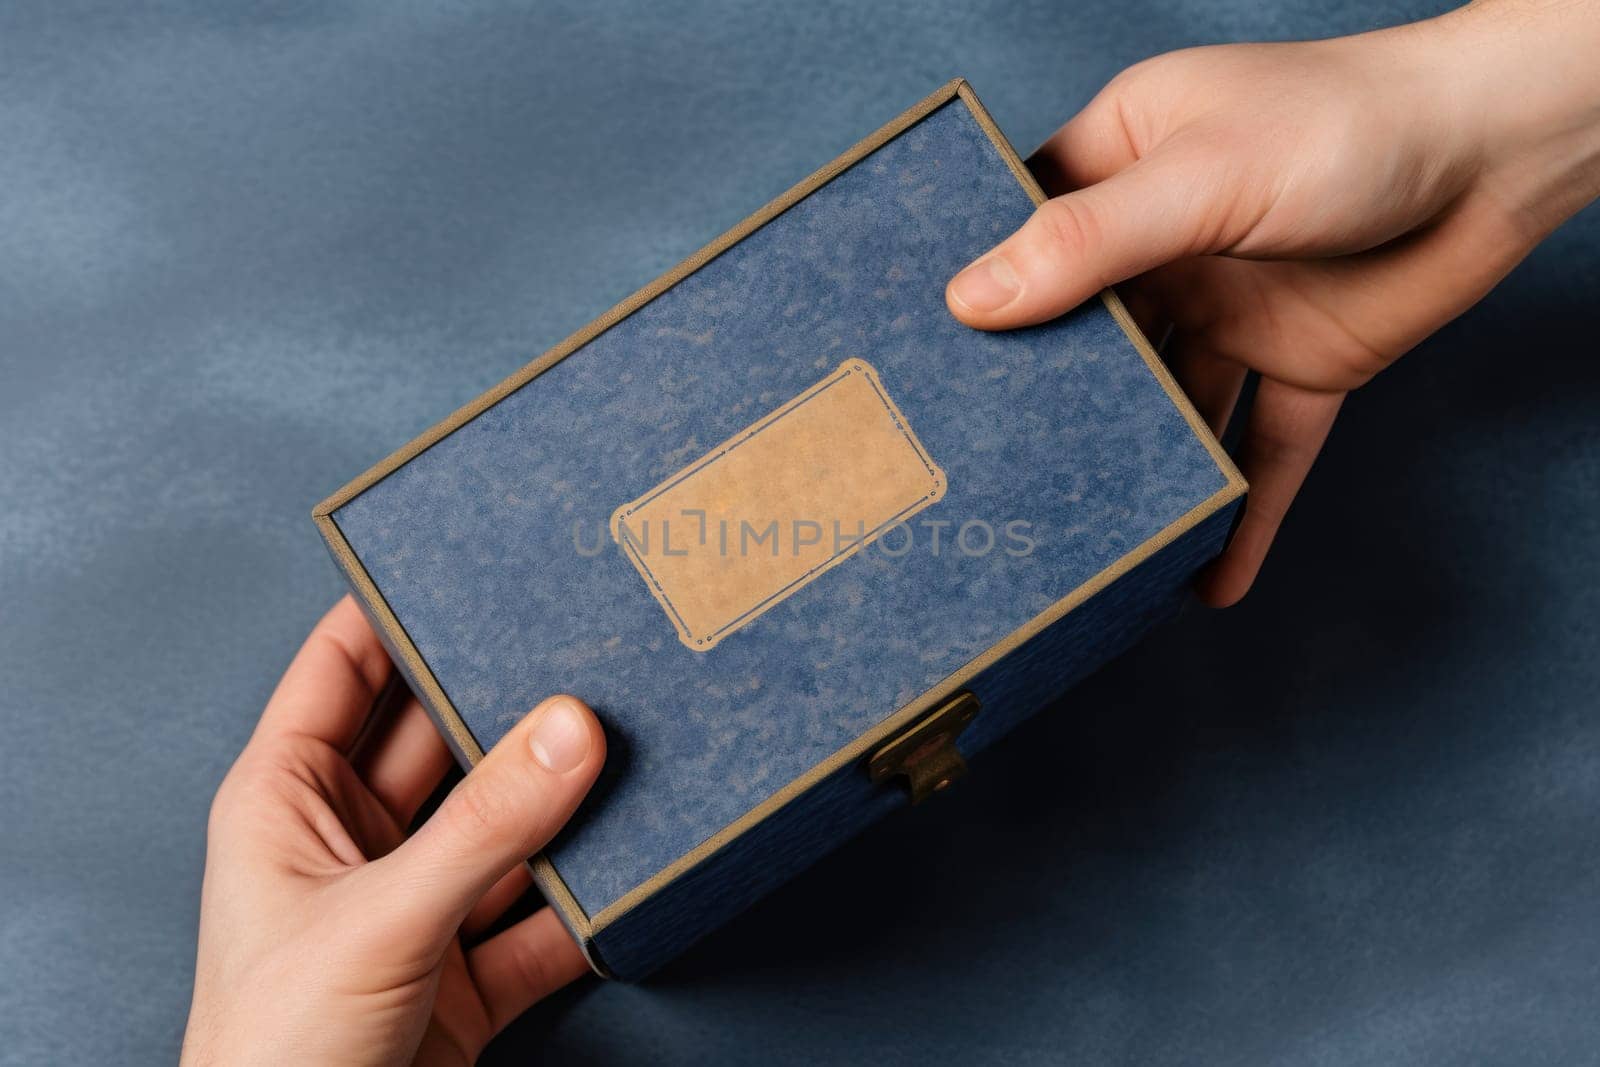 a hand holding a mailing box mockup delivery service concept photo.